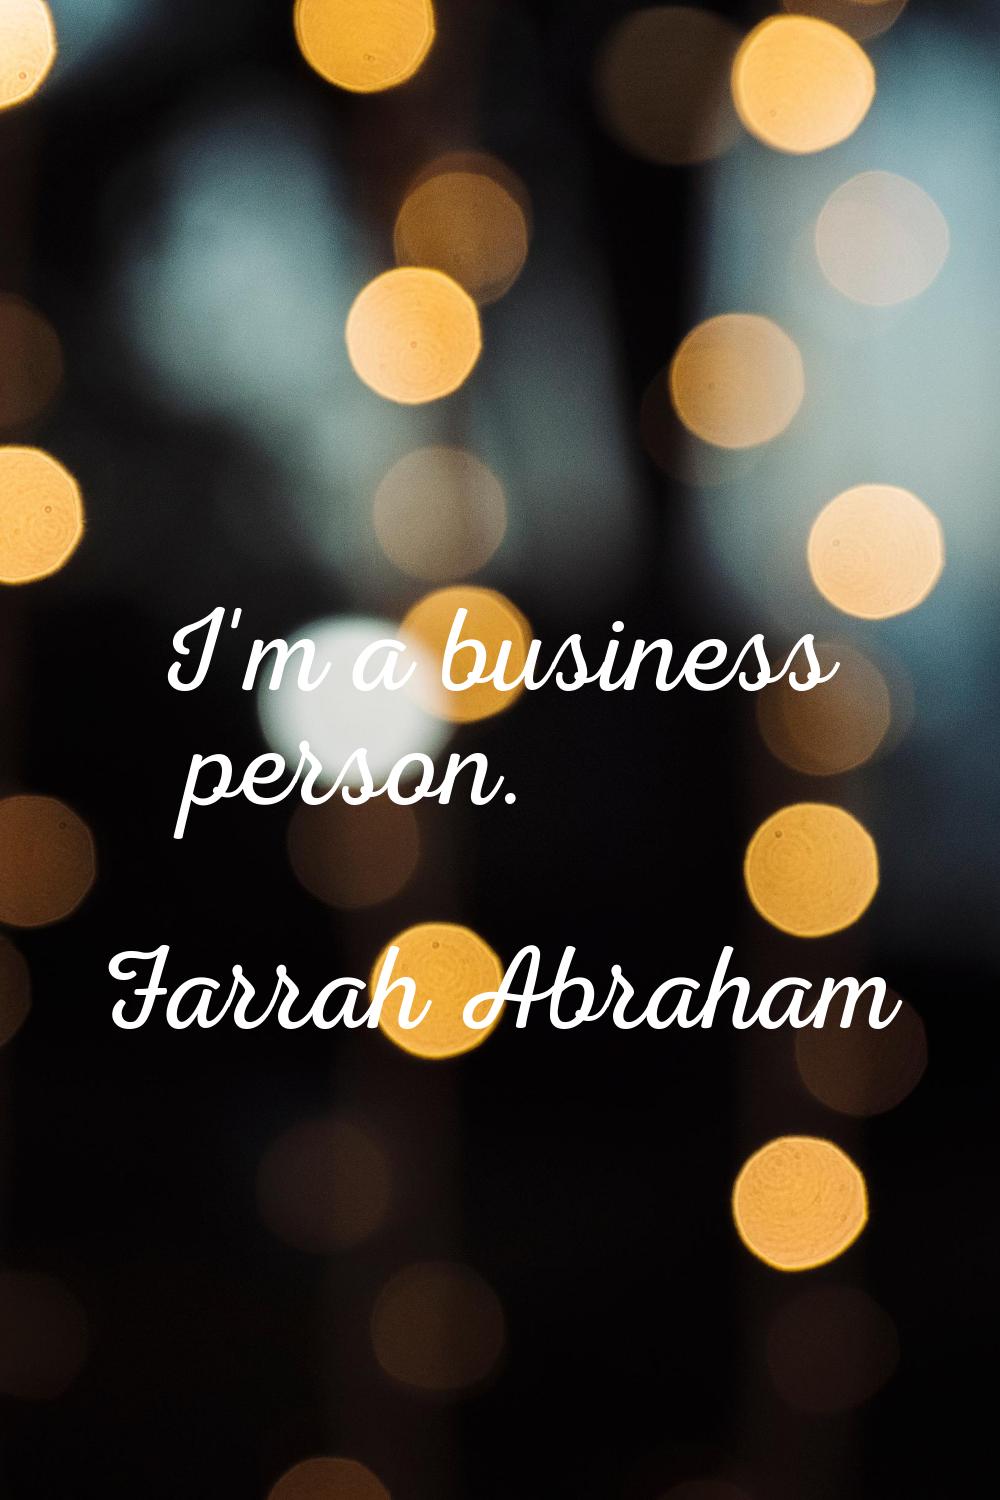 I'm a business person.